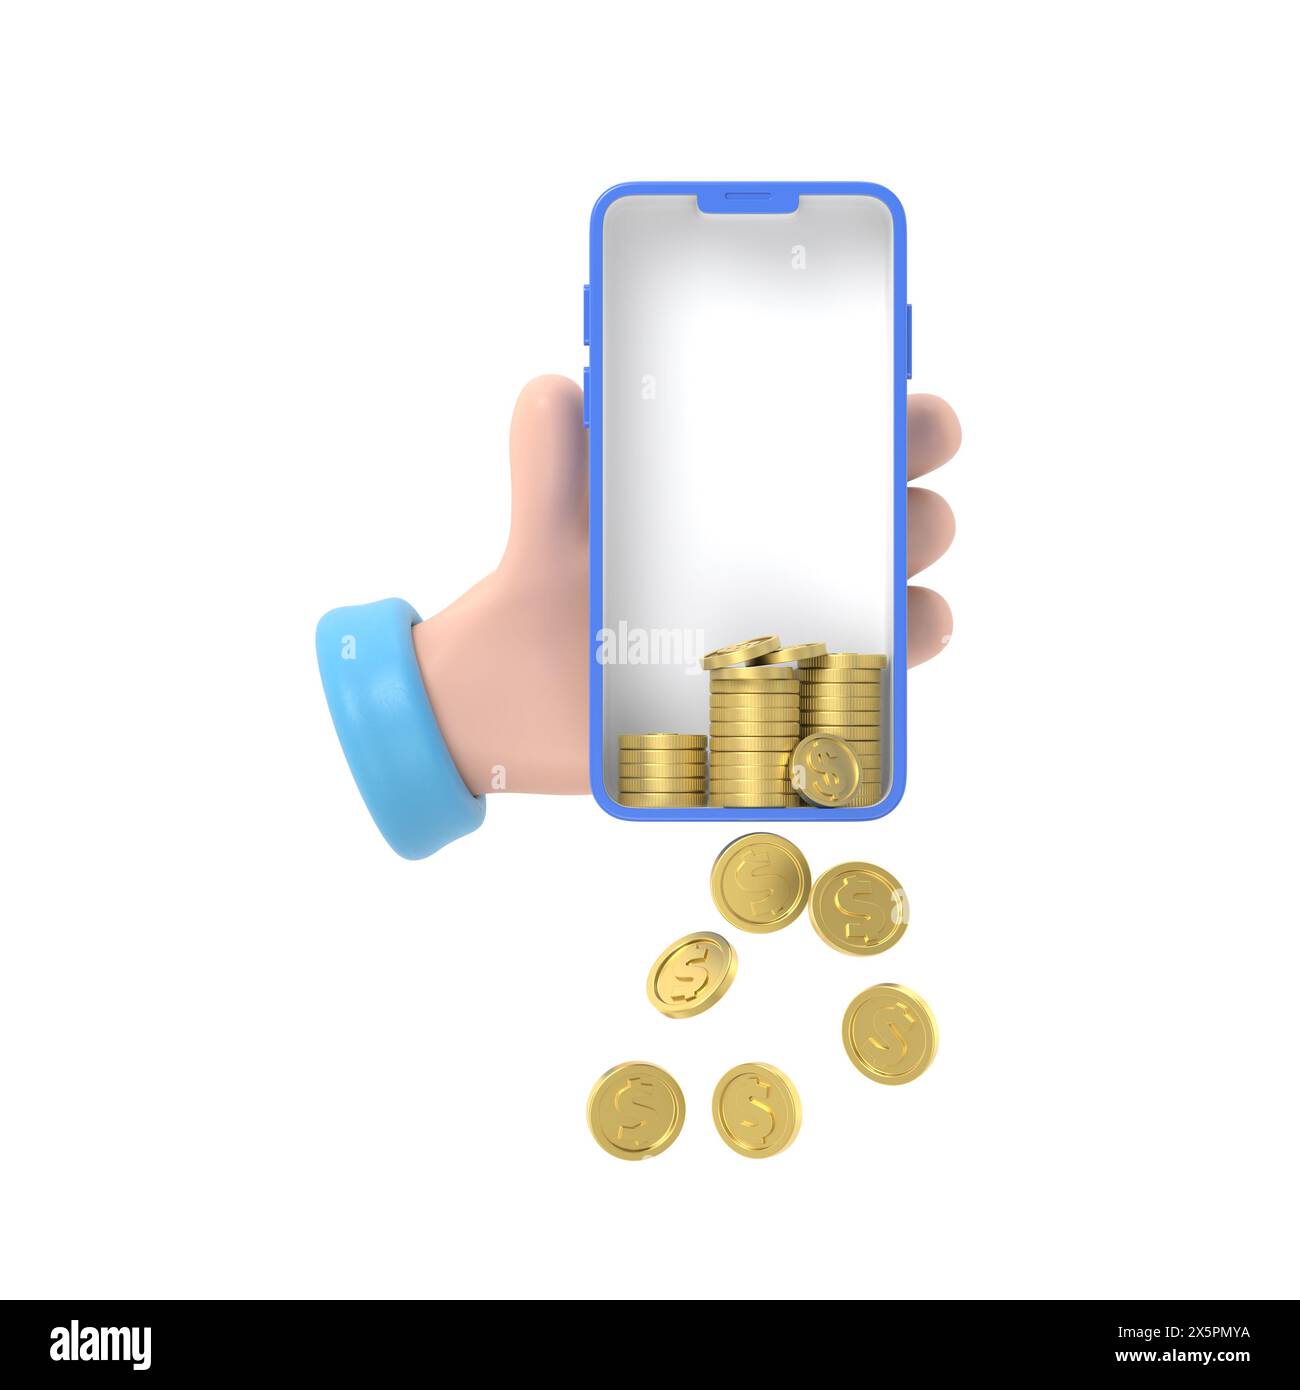 Cartoon Gesture Icon Mockup.Cartoon hand with phone and coins falling. Cashback and earning. Concept of financial mobile app and banking.3D rendering Stock Photo